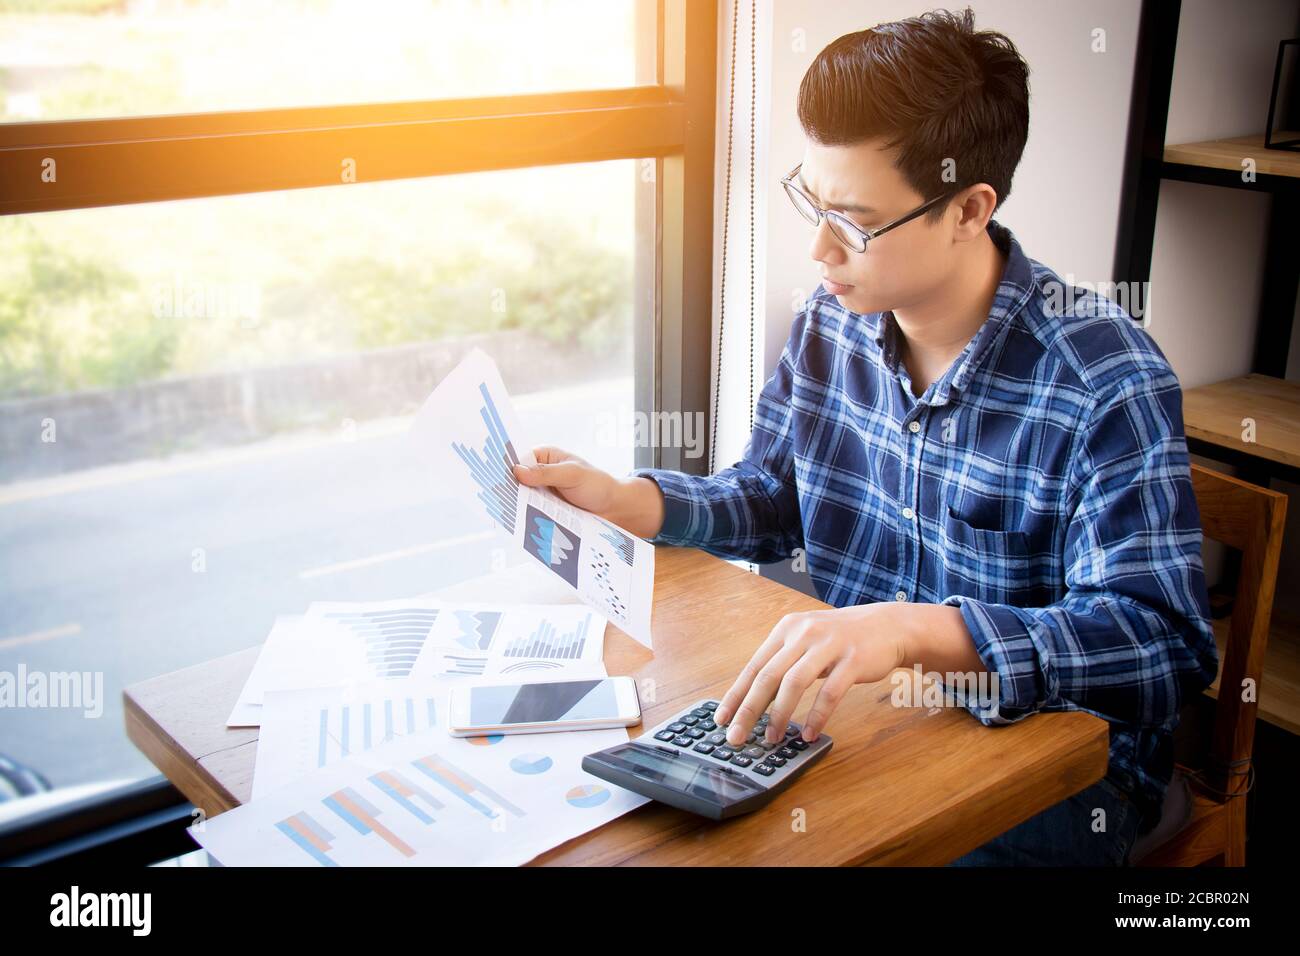 Business accounting people, saving, finance and economy concept. Serious Asian businessman using calculator for calculations documents , charts Stock Photo